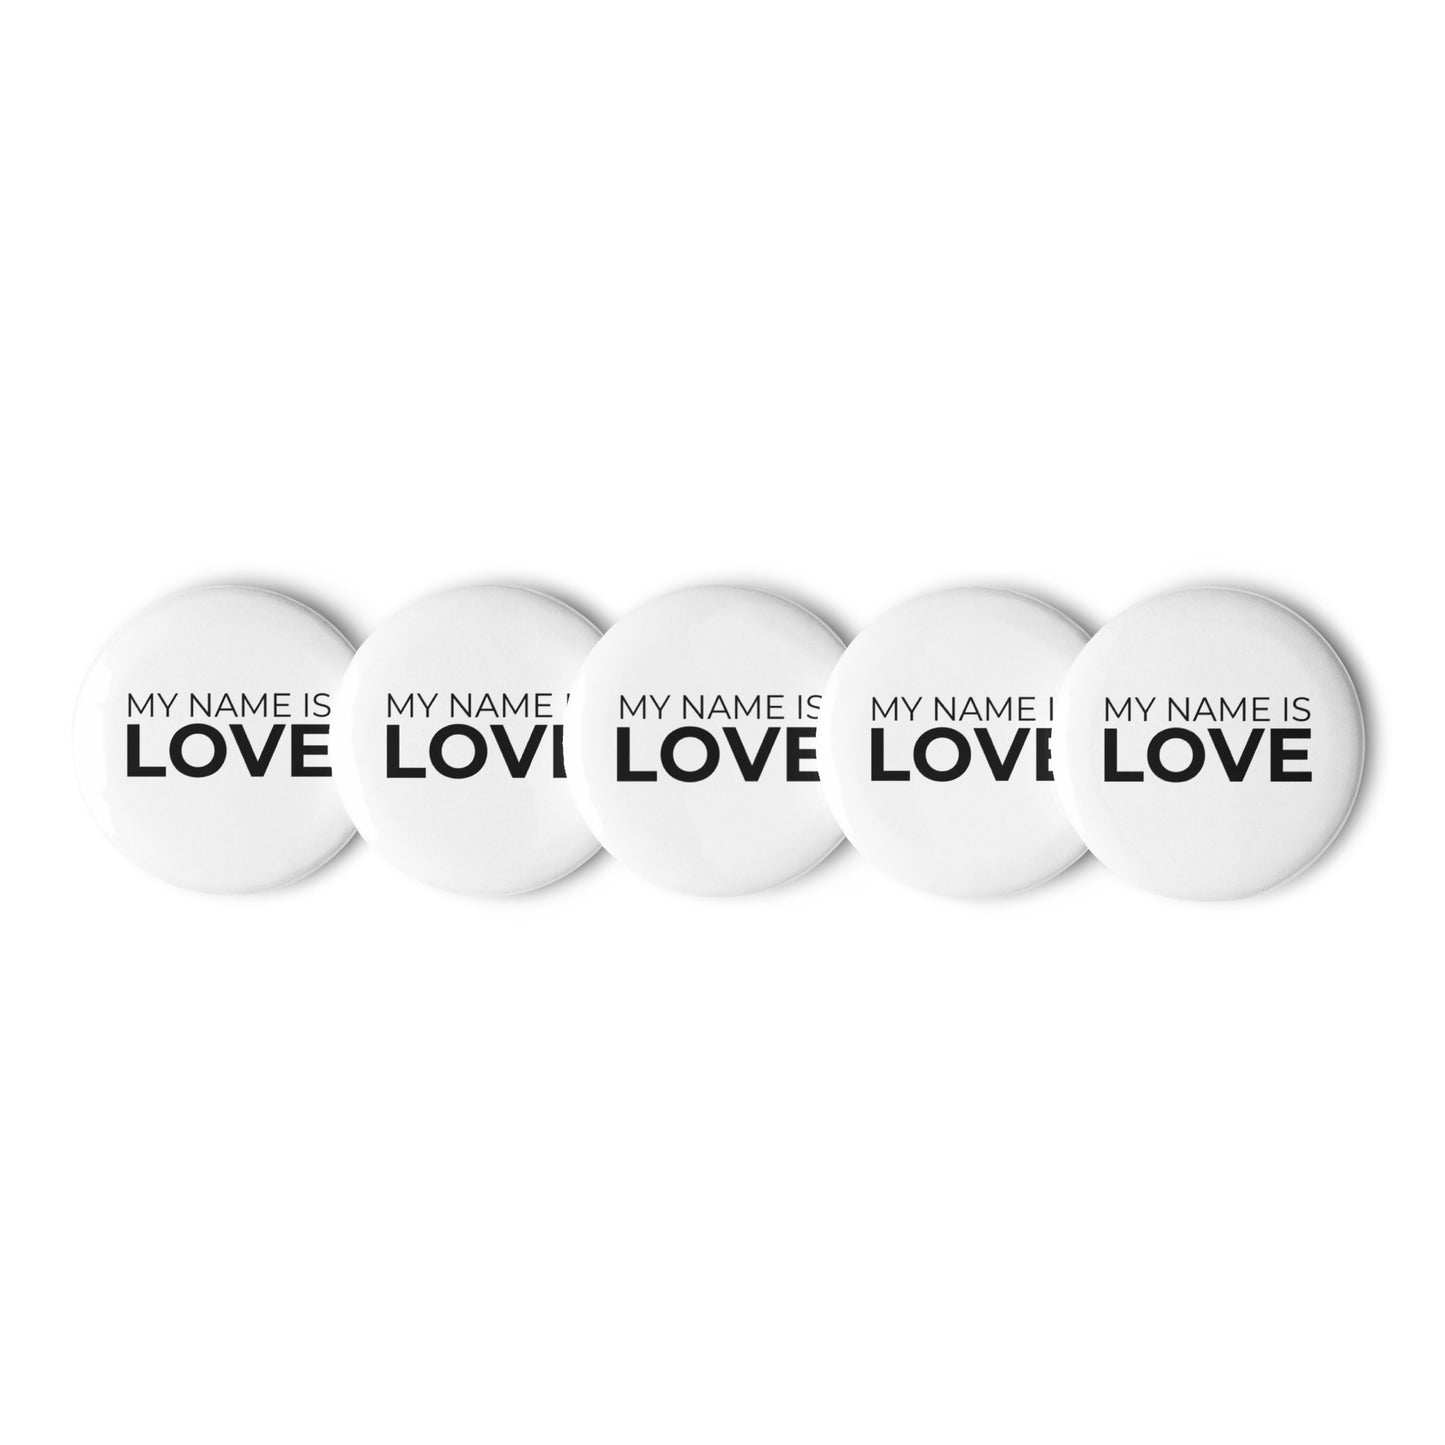 My Name Is Love: set of 5 pins / buttons